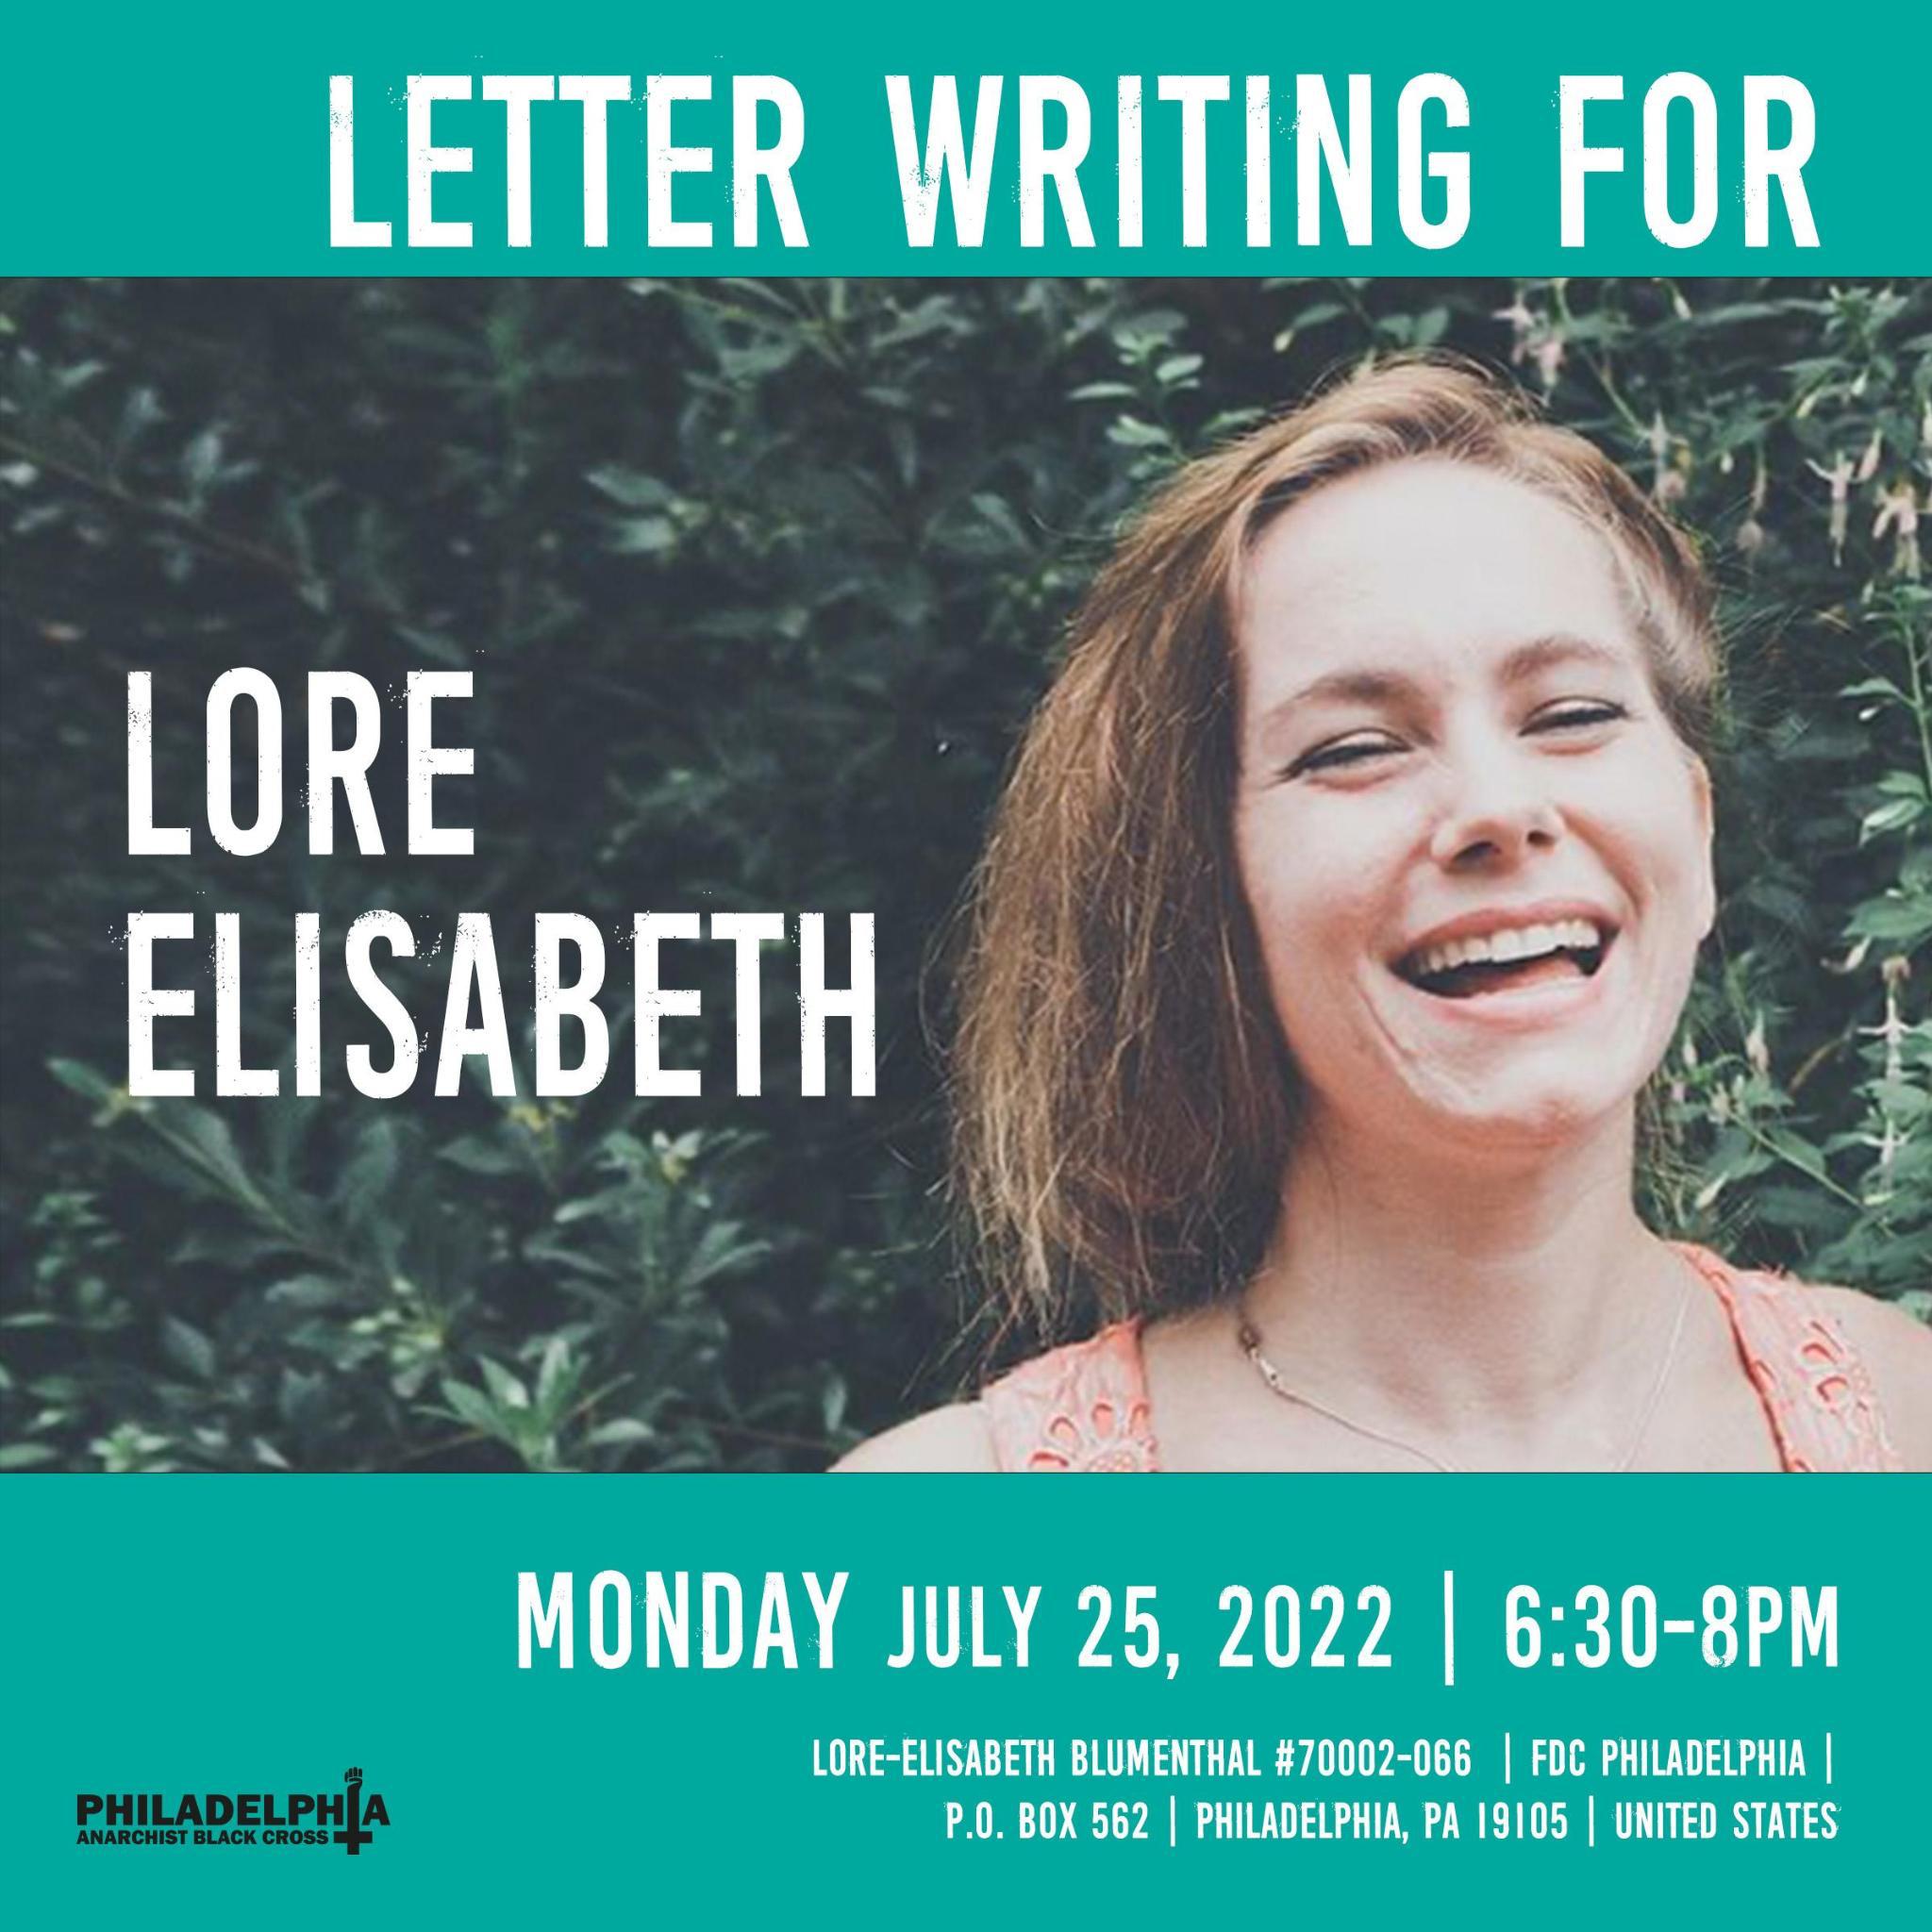 Monday July 25th: Letter-writing for Lore-Elisabeth Blumenthal